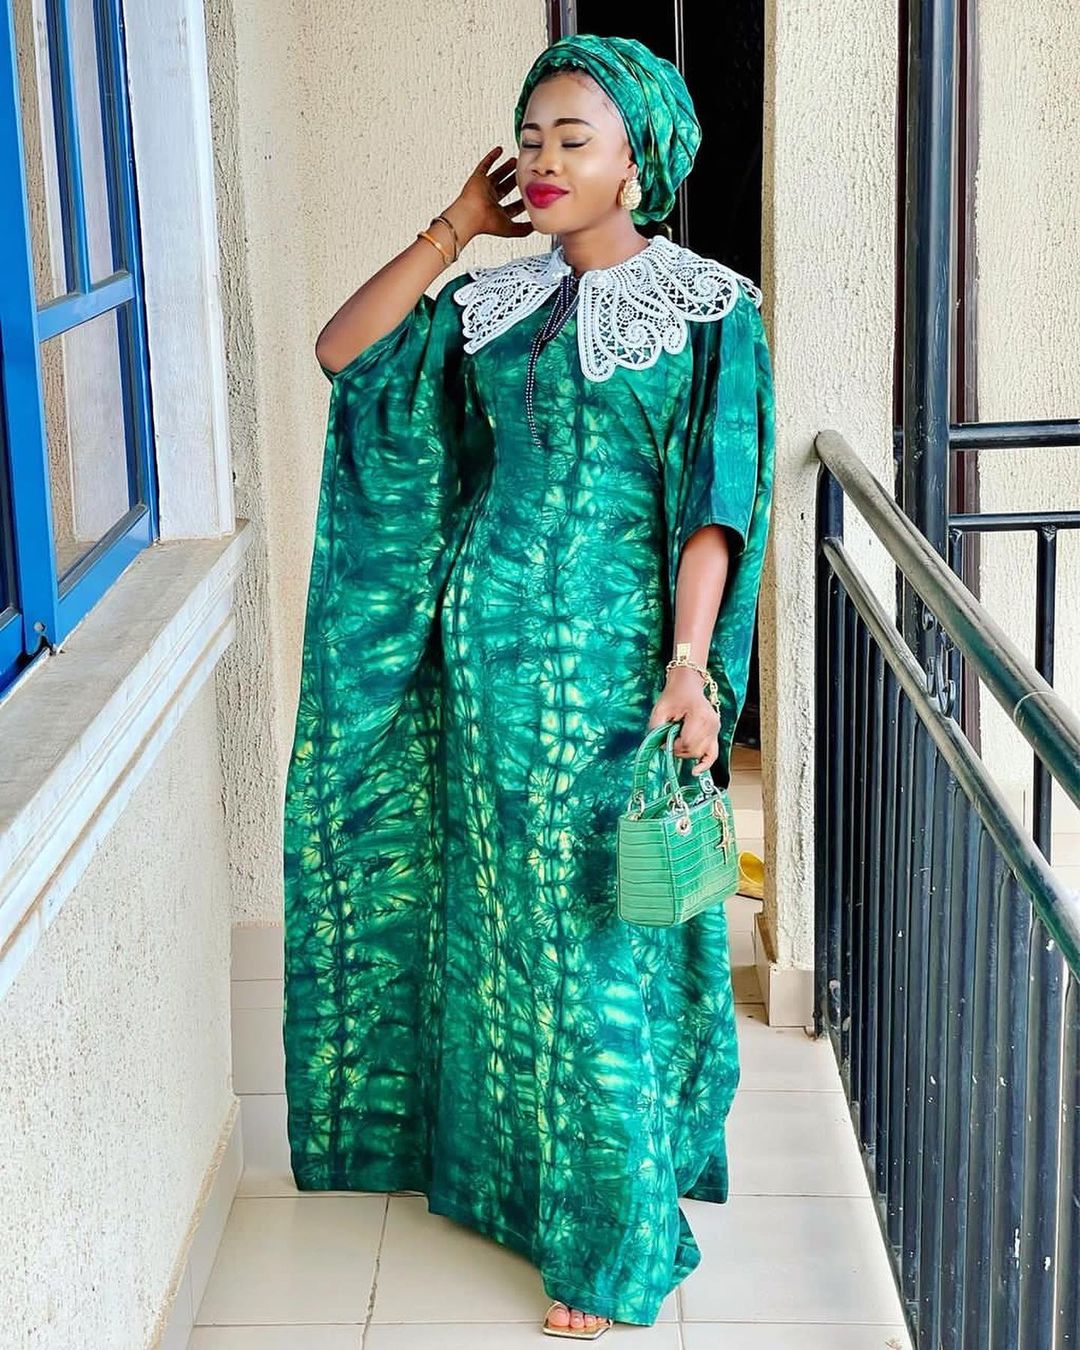 Charming And Simple Boubou Styles For All Ladies | Zaineey's Blog